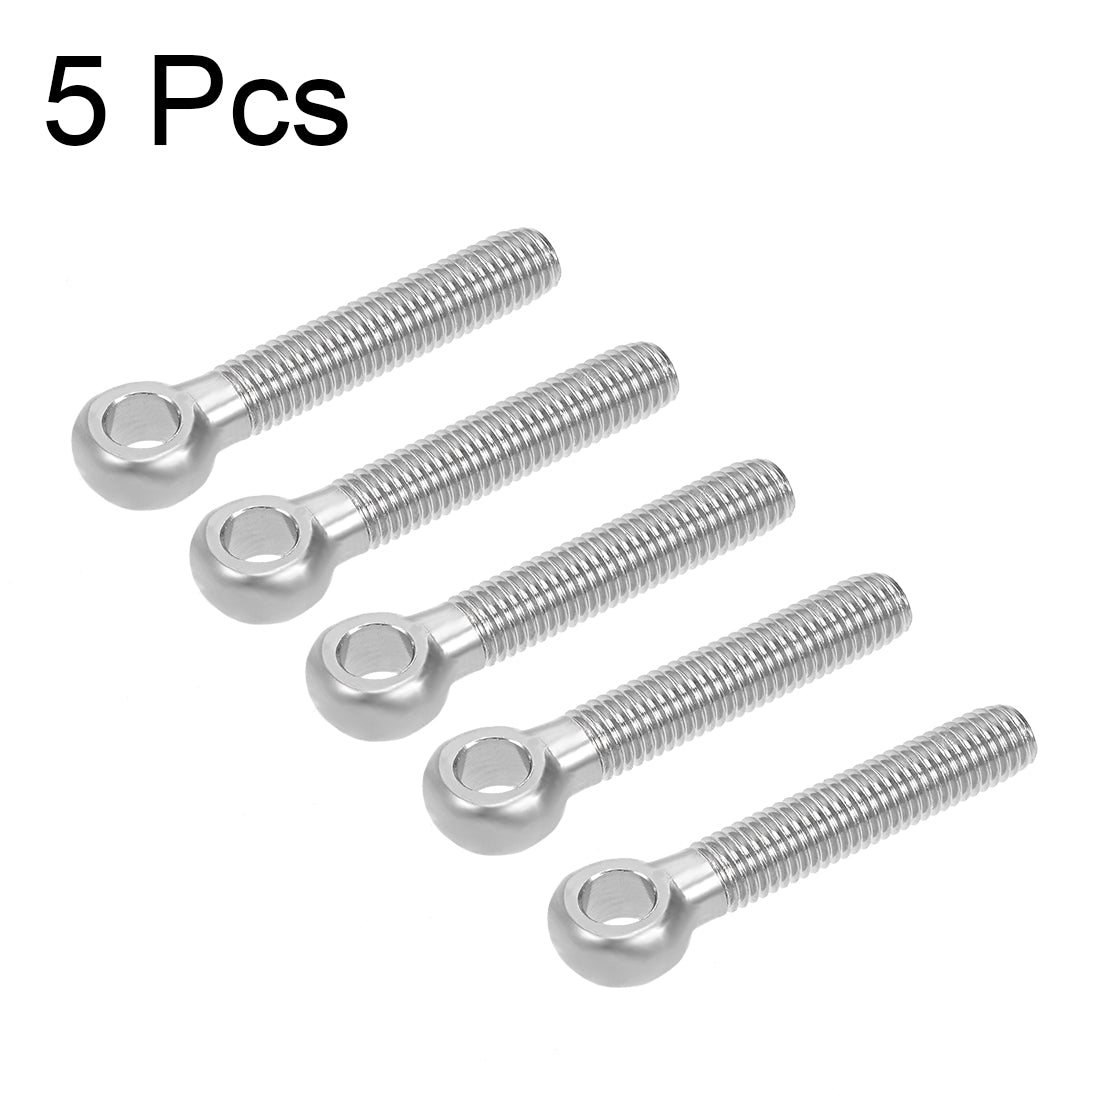 Uxcell Uxcell M12 x 70mm 304 Stainless Steel Machine Shoulder Lift Eye Bolt Rigging 5pcs Silver Tone